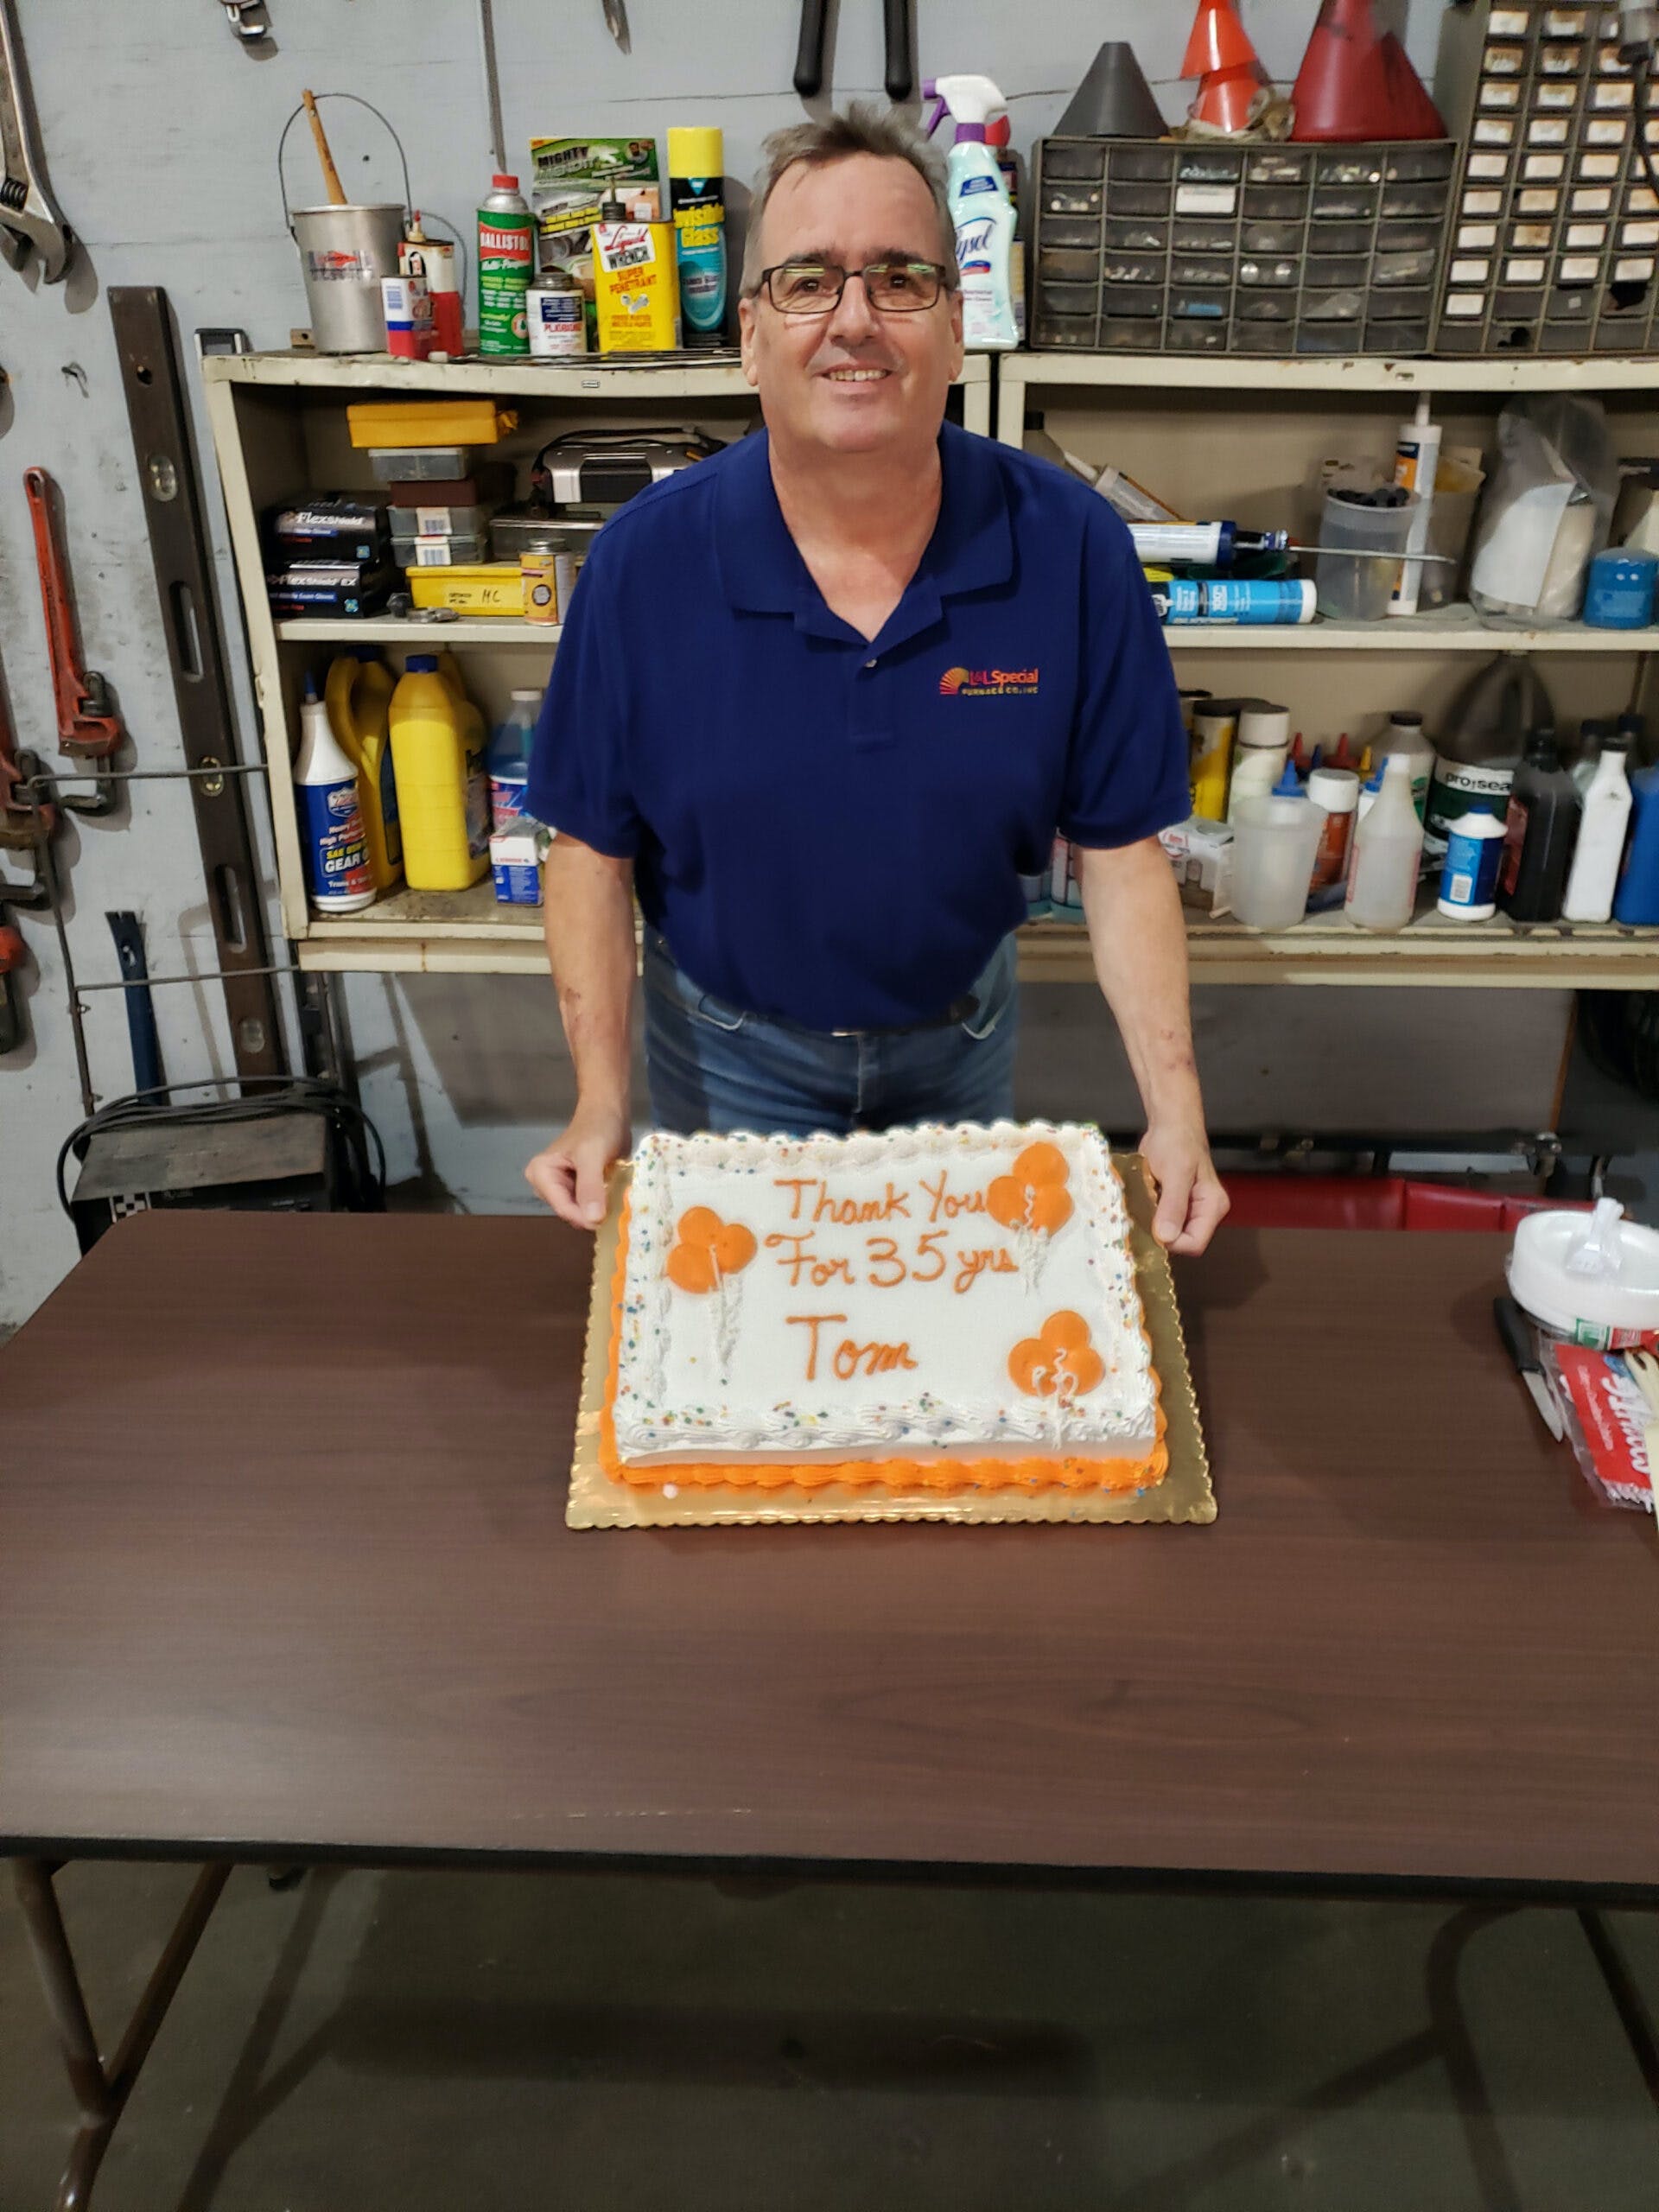 Sales Manager Tom Schultz celebrated his 35th Anniversary